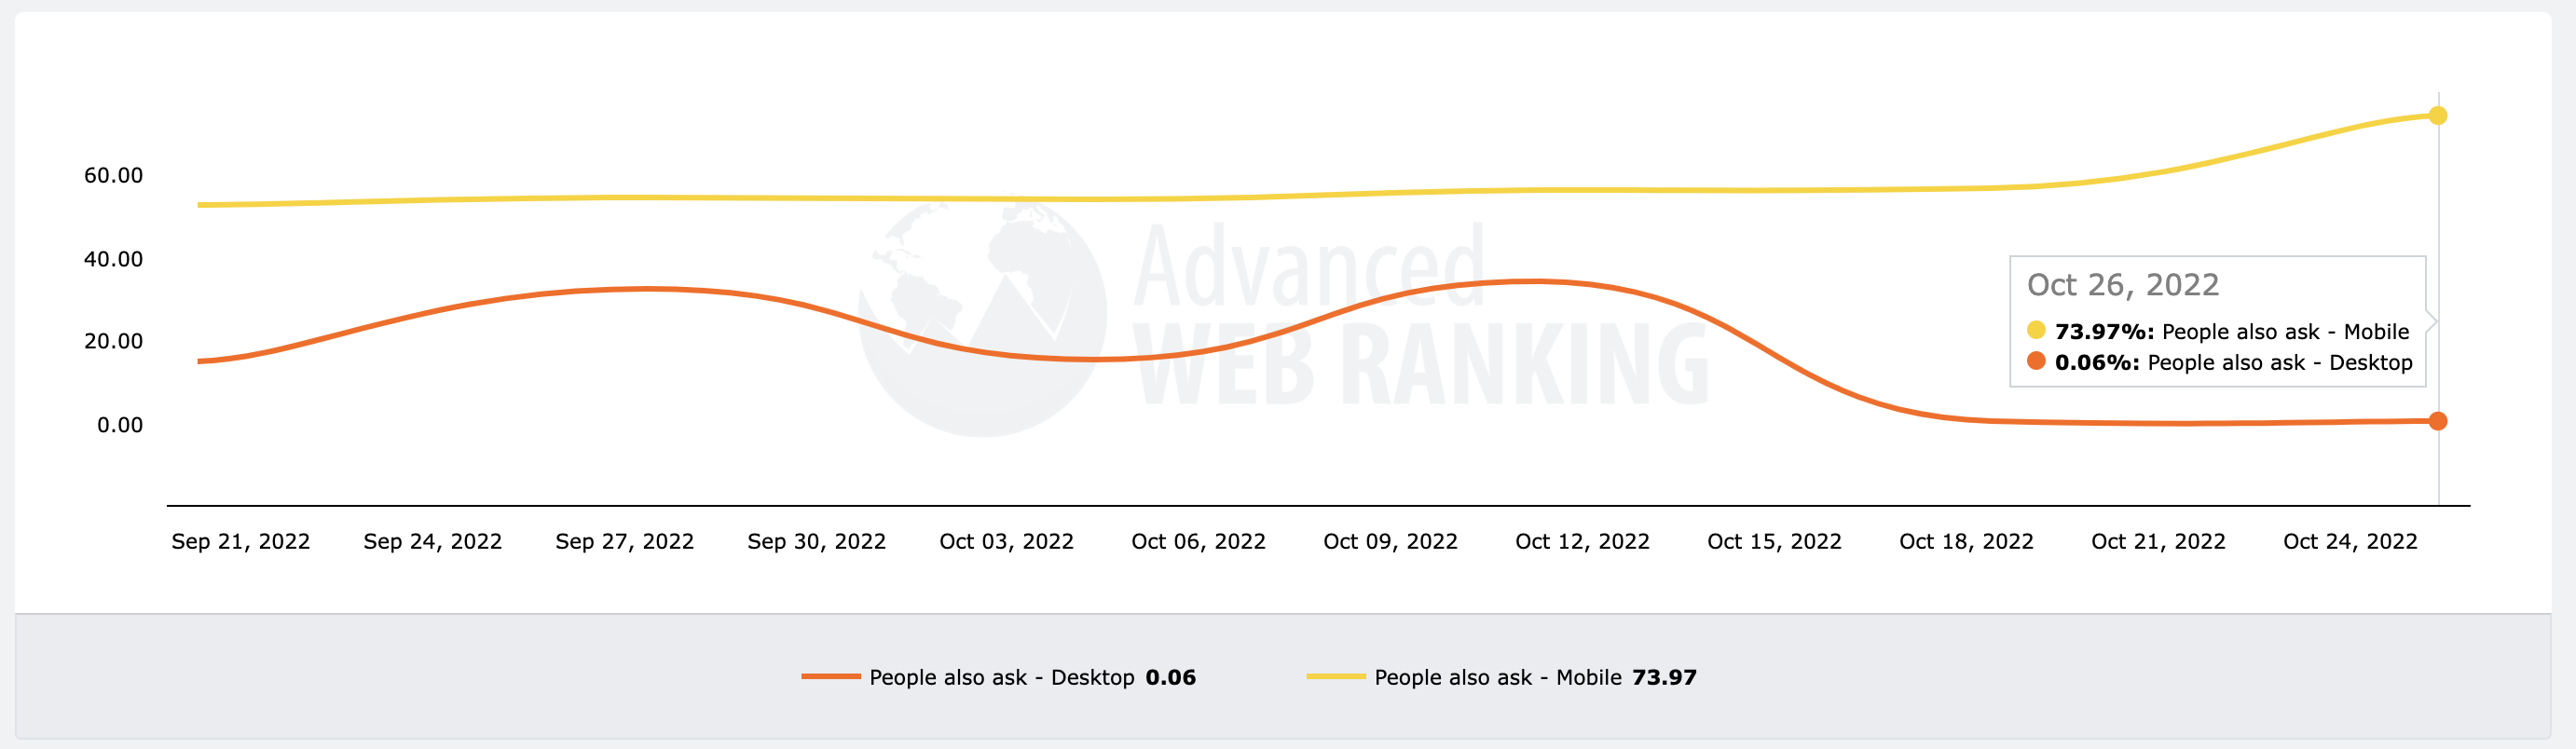 PAA on Desktop and Mobile - Advanced Web Ranking